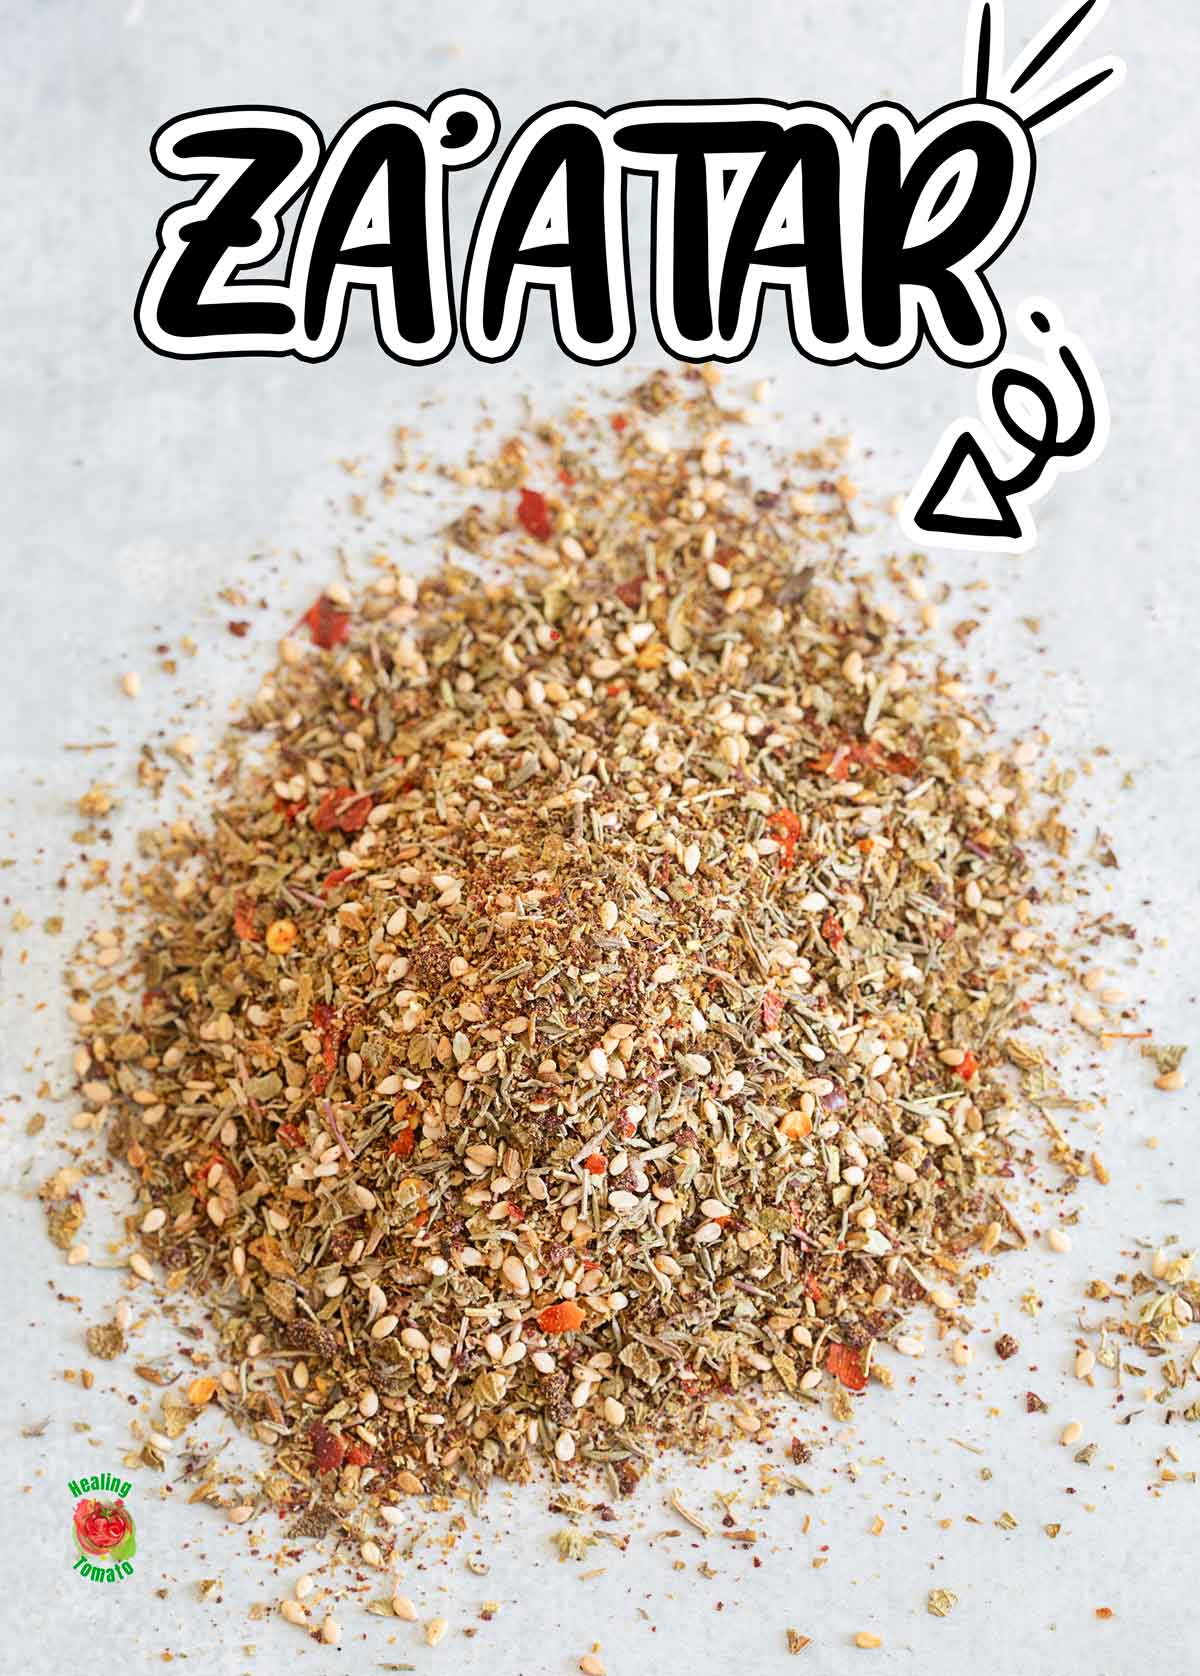 Top view of zaaatar seasoning arranged in a pyramind form on a blue background